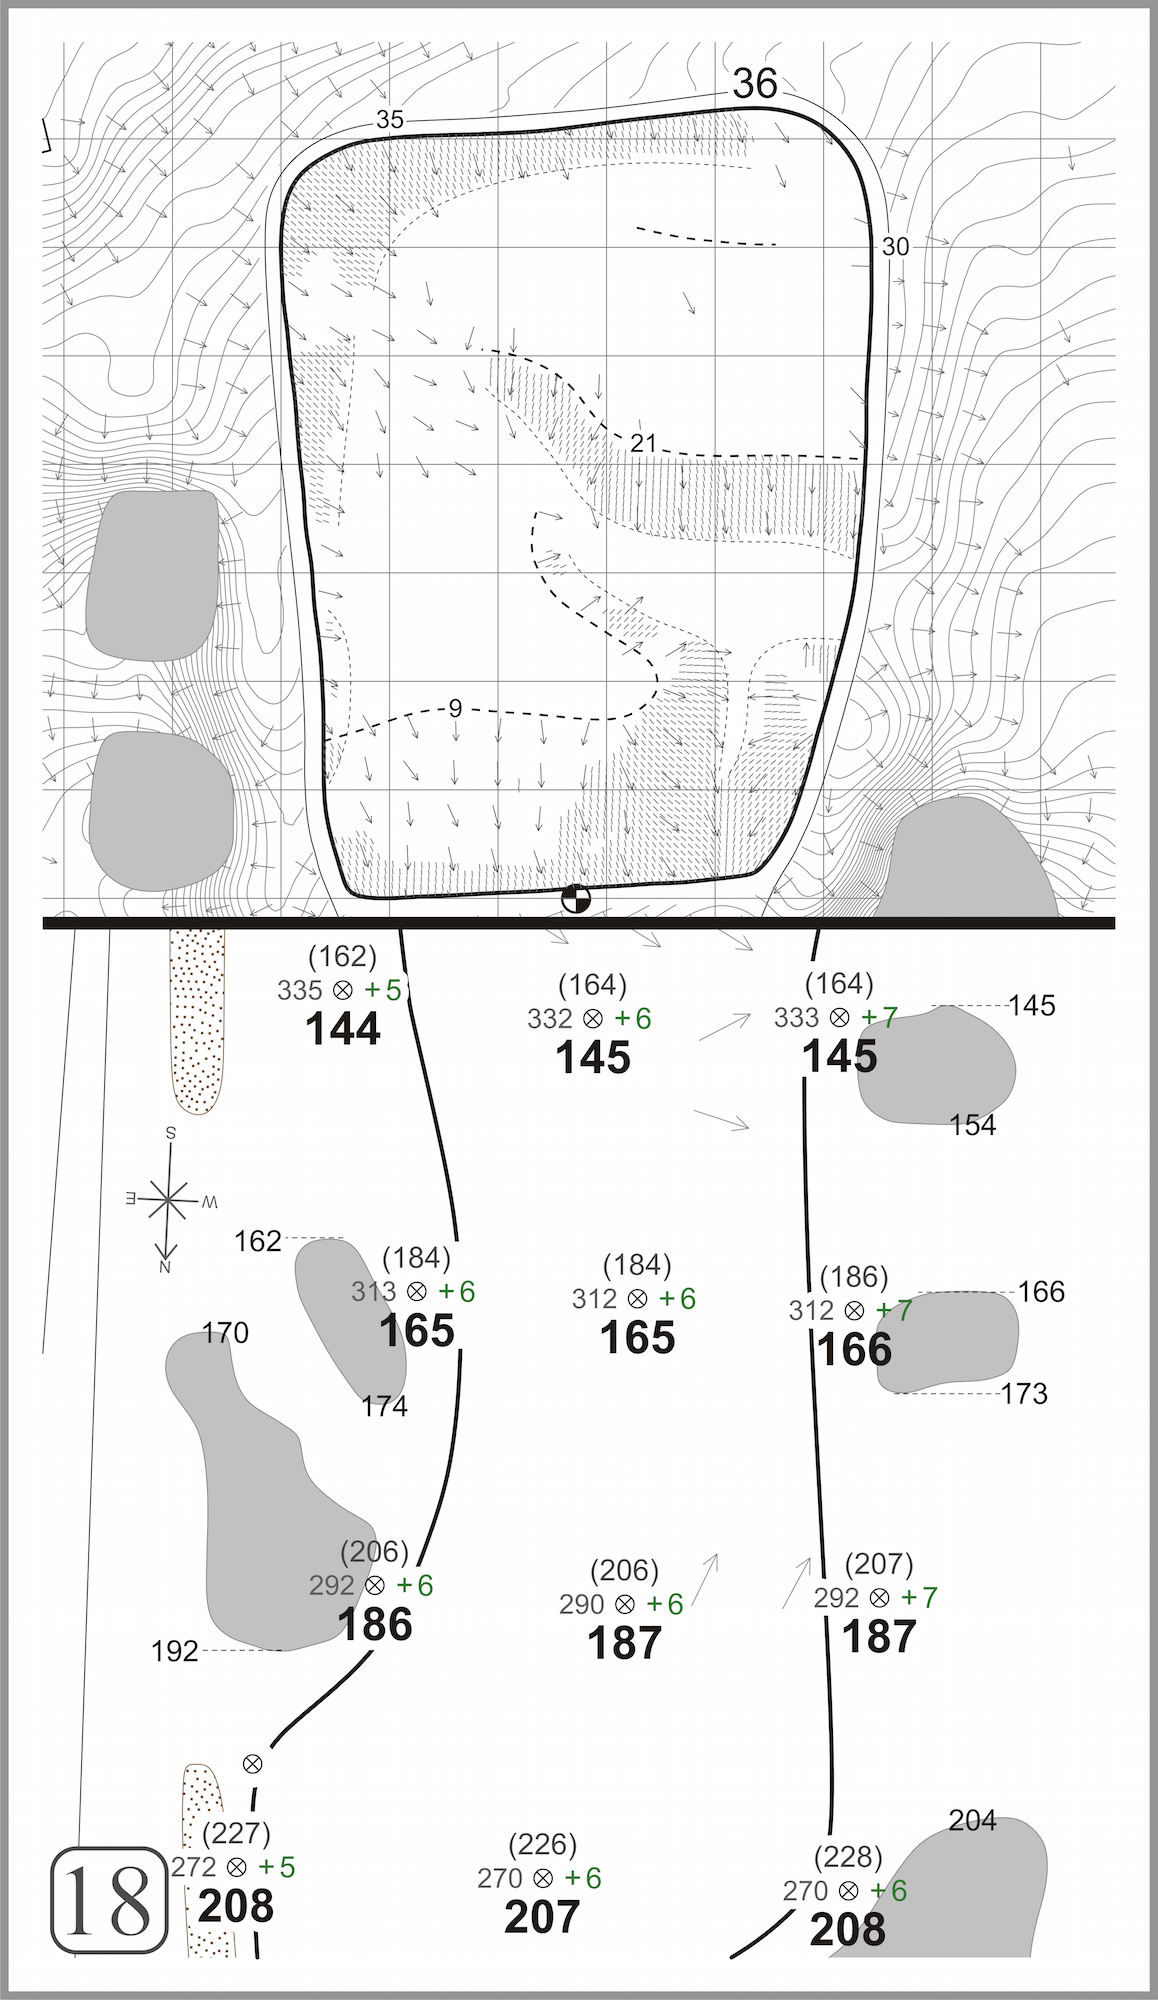 yardage-book-template-explore-all-things-golf-to-become-a-pro